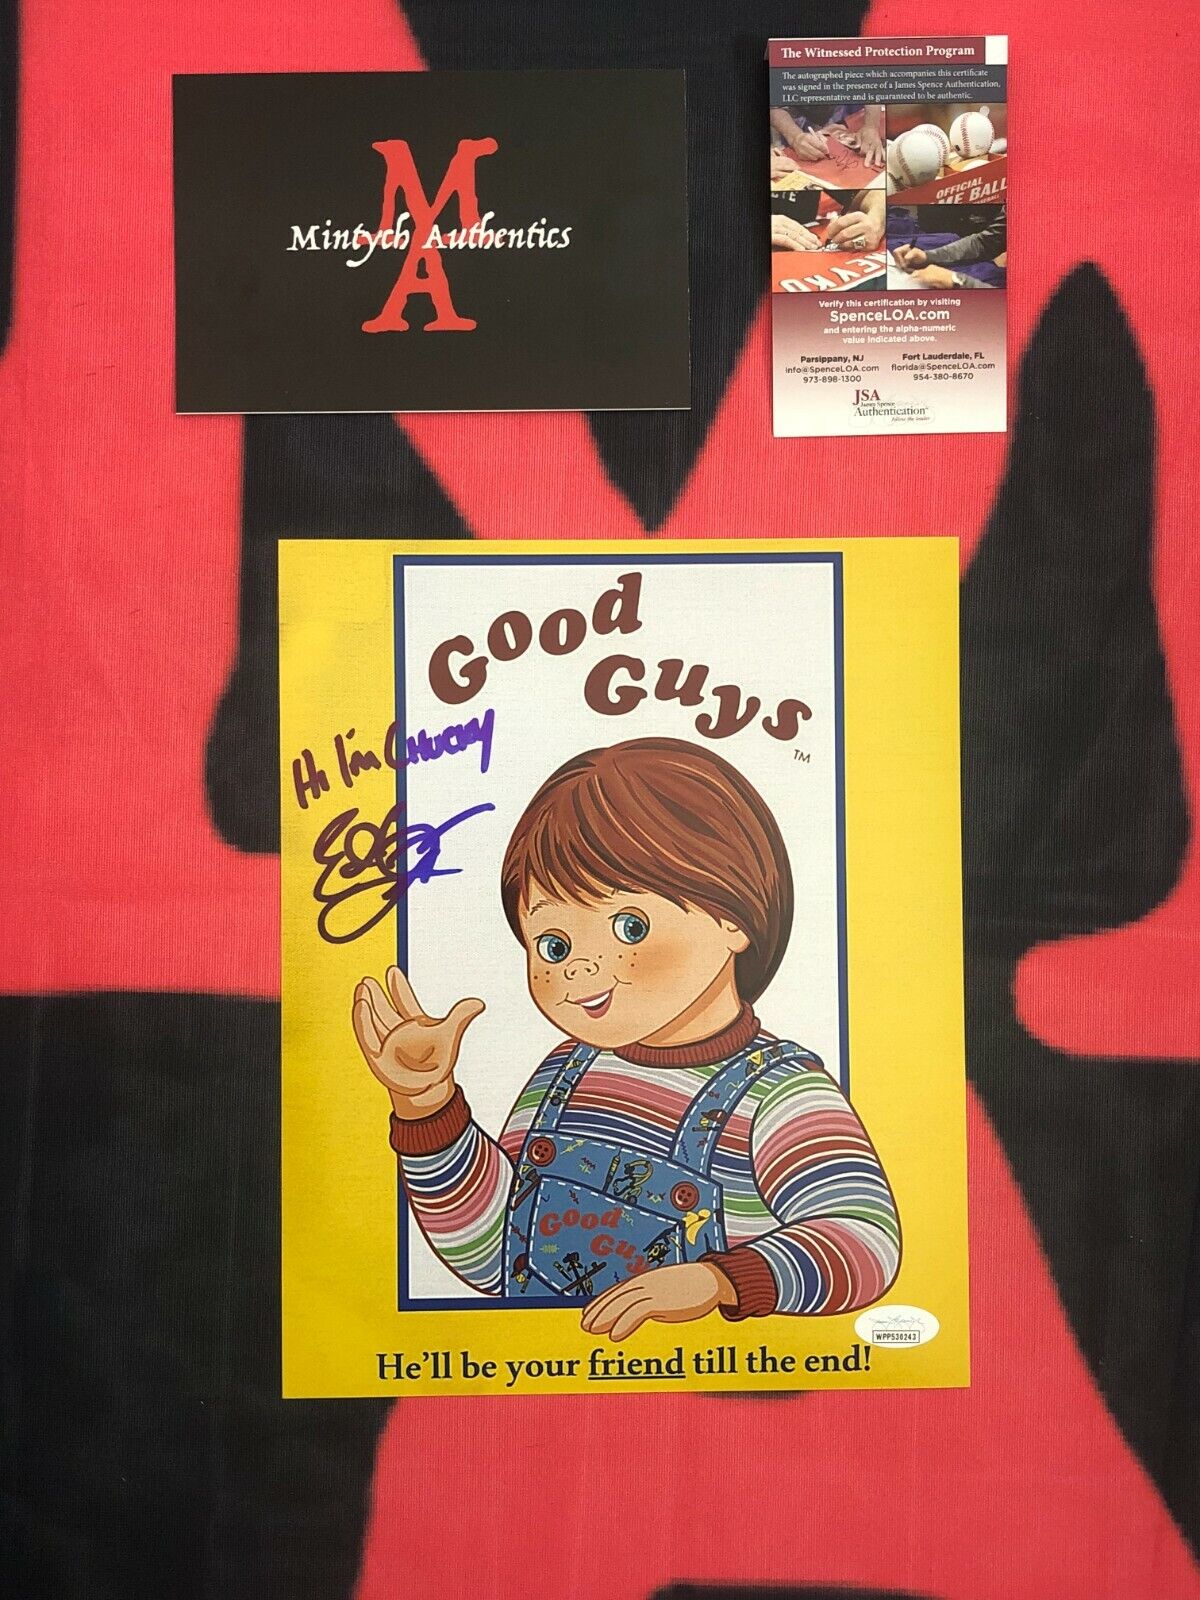 EDAN GROSS AUTOGRAPHED SIGNED 8x10 Photo Poster painting! CHILD'S PLAY! JSA COA! GOOD GUYS DOLL